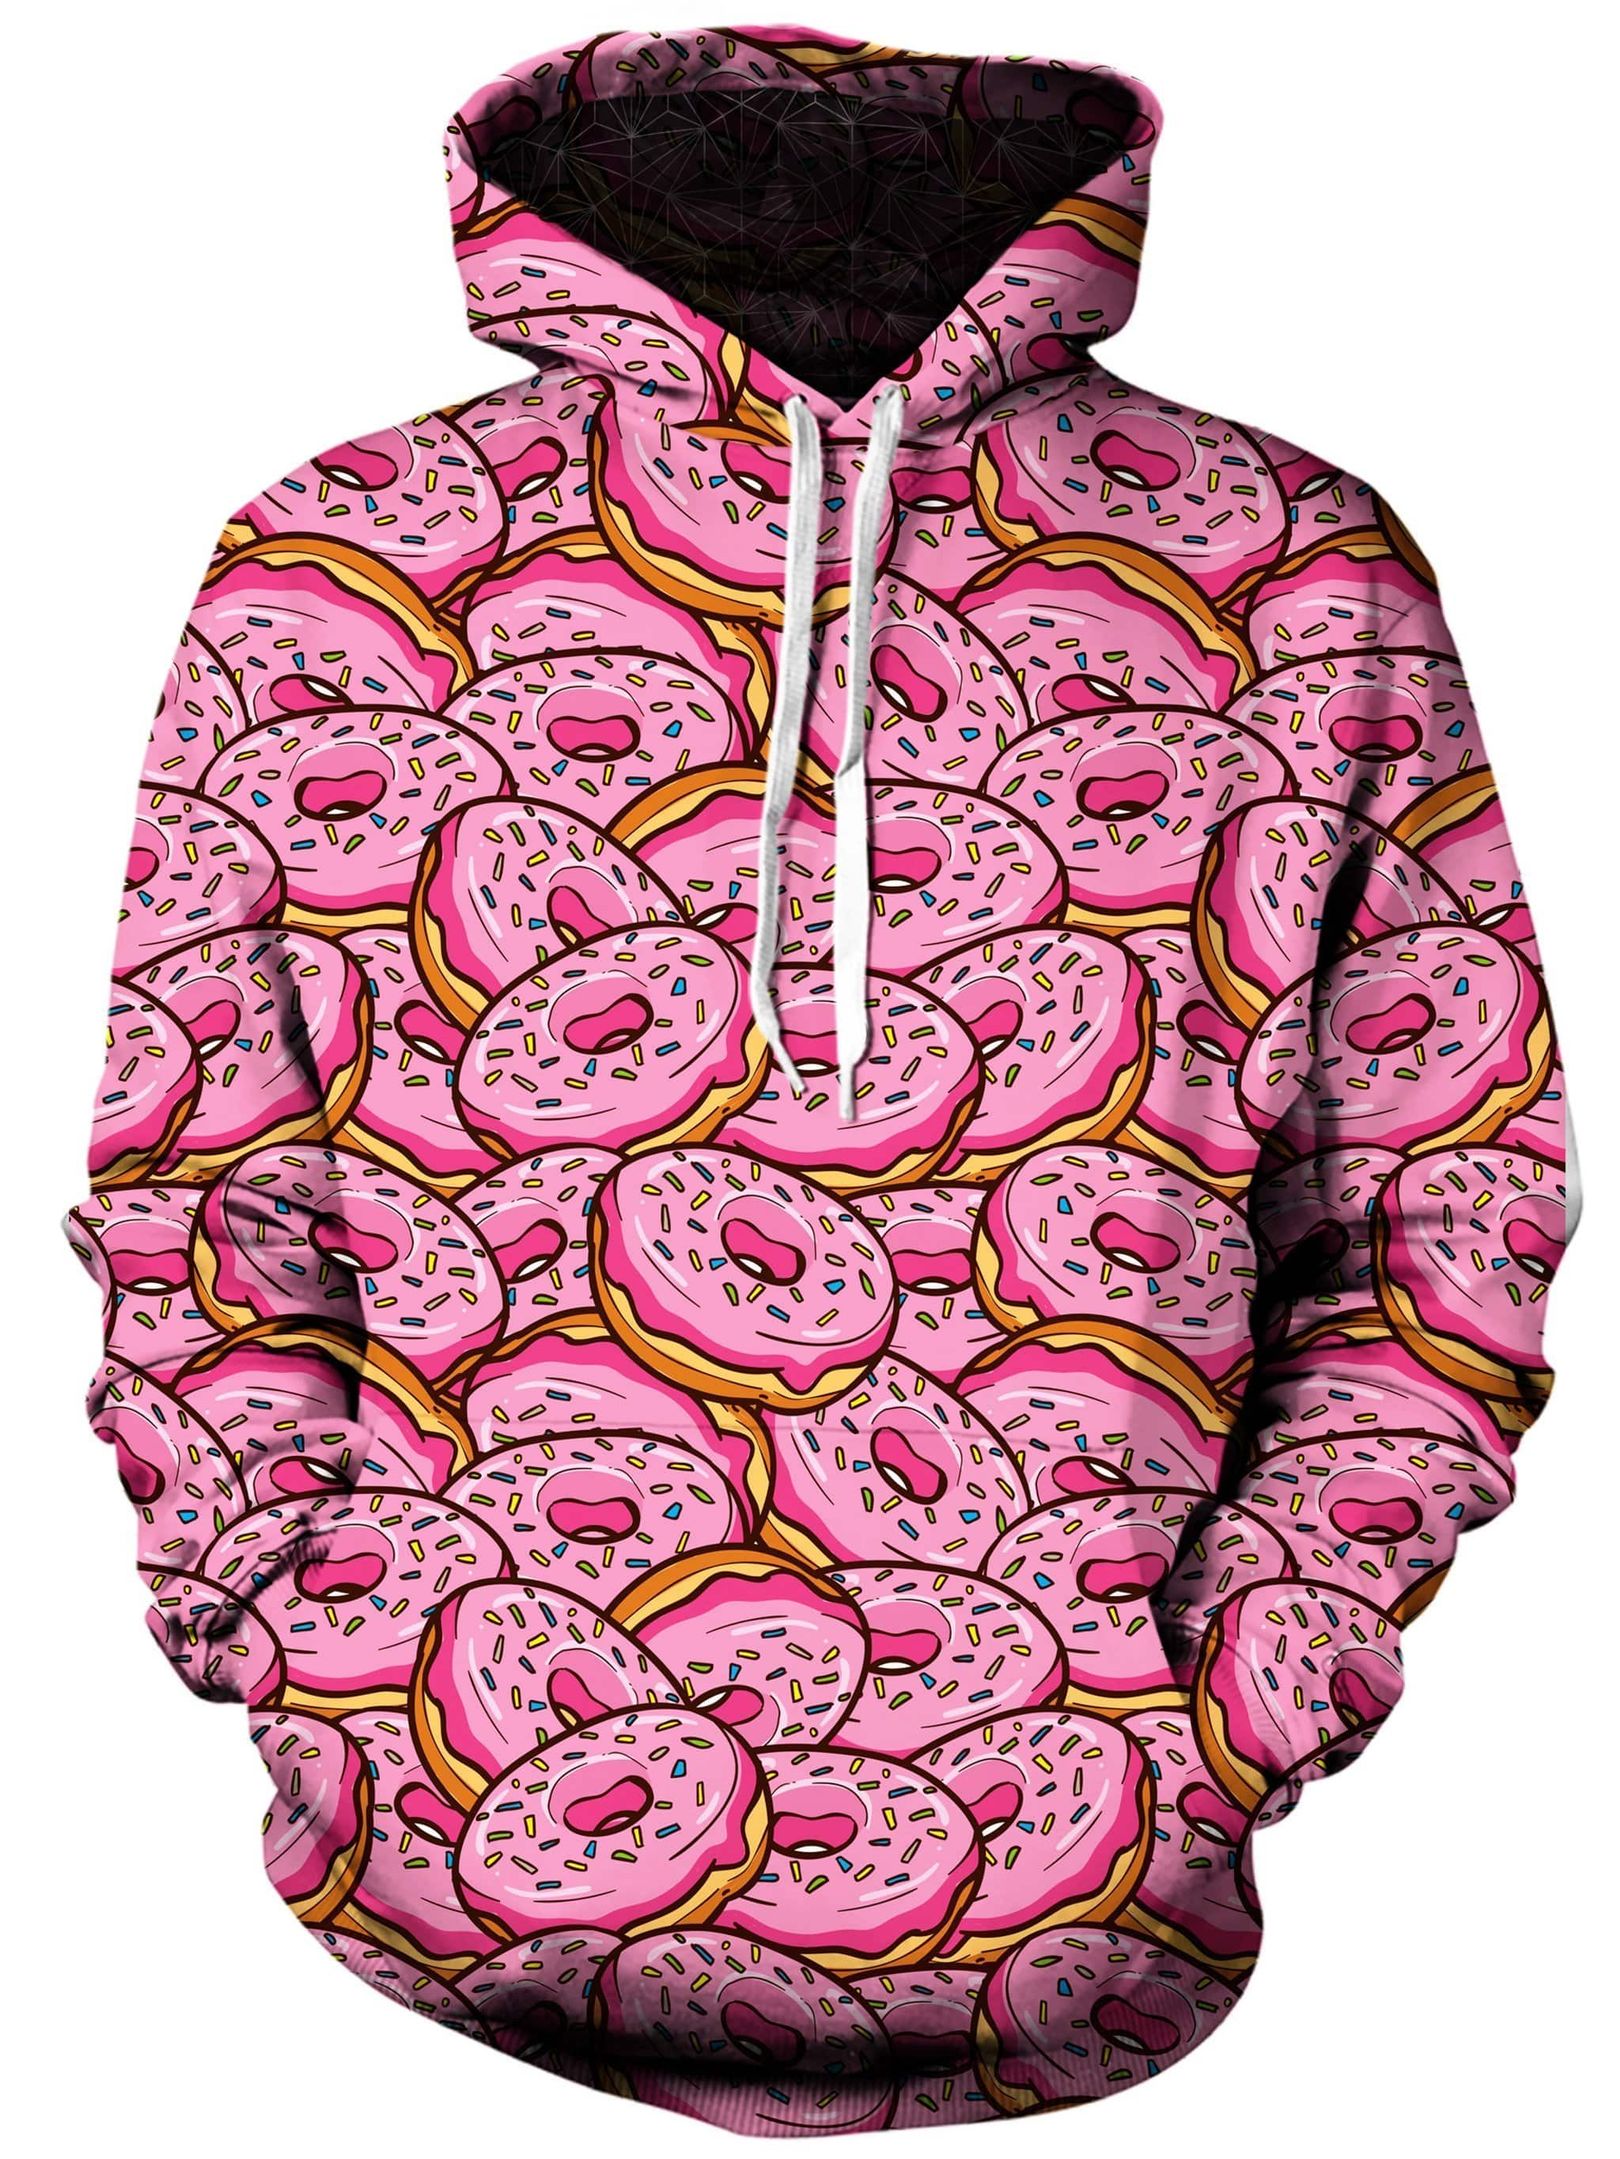 Donut Pile Unisex Hoodie 3D All Over Print